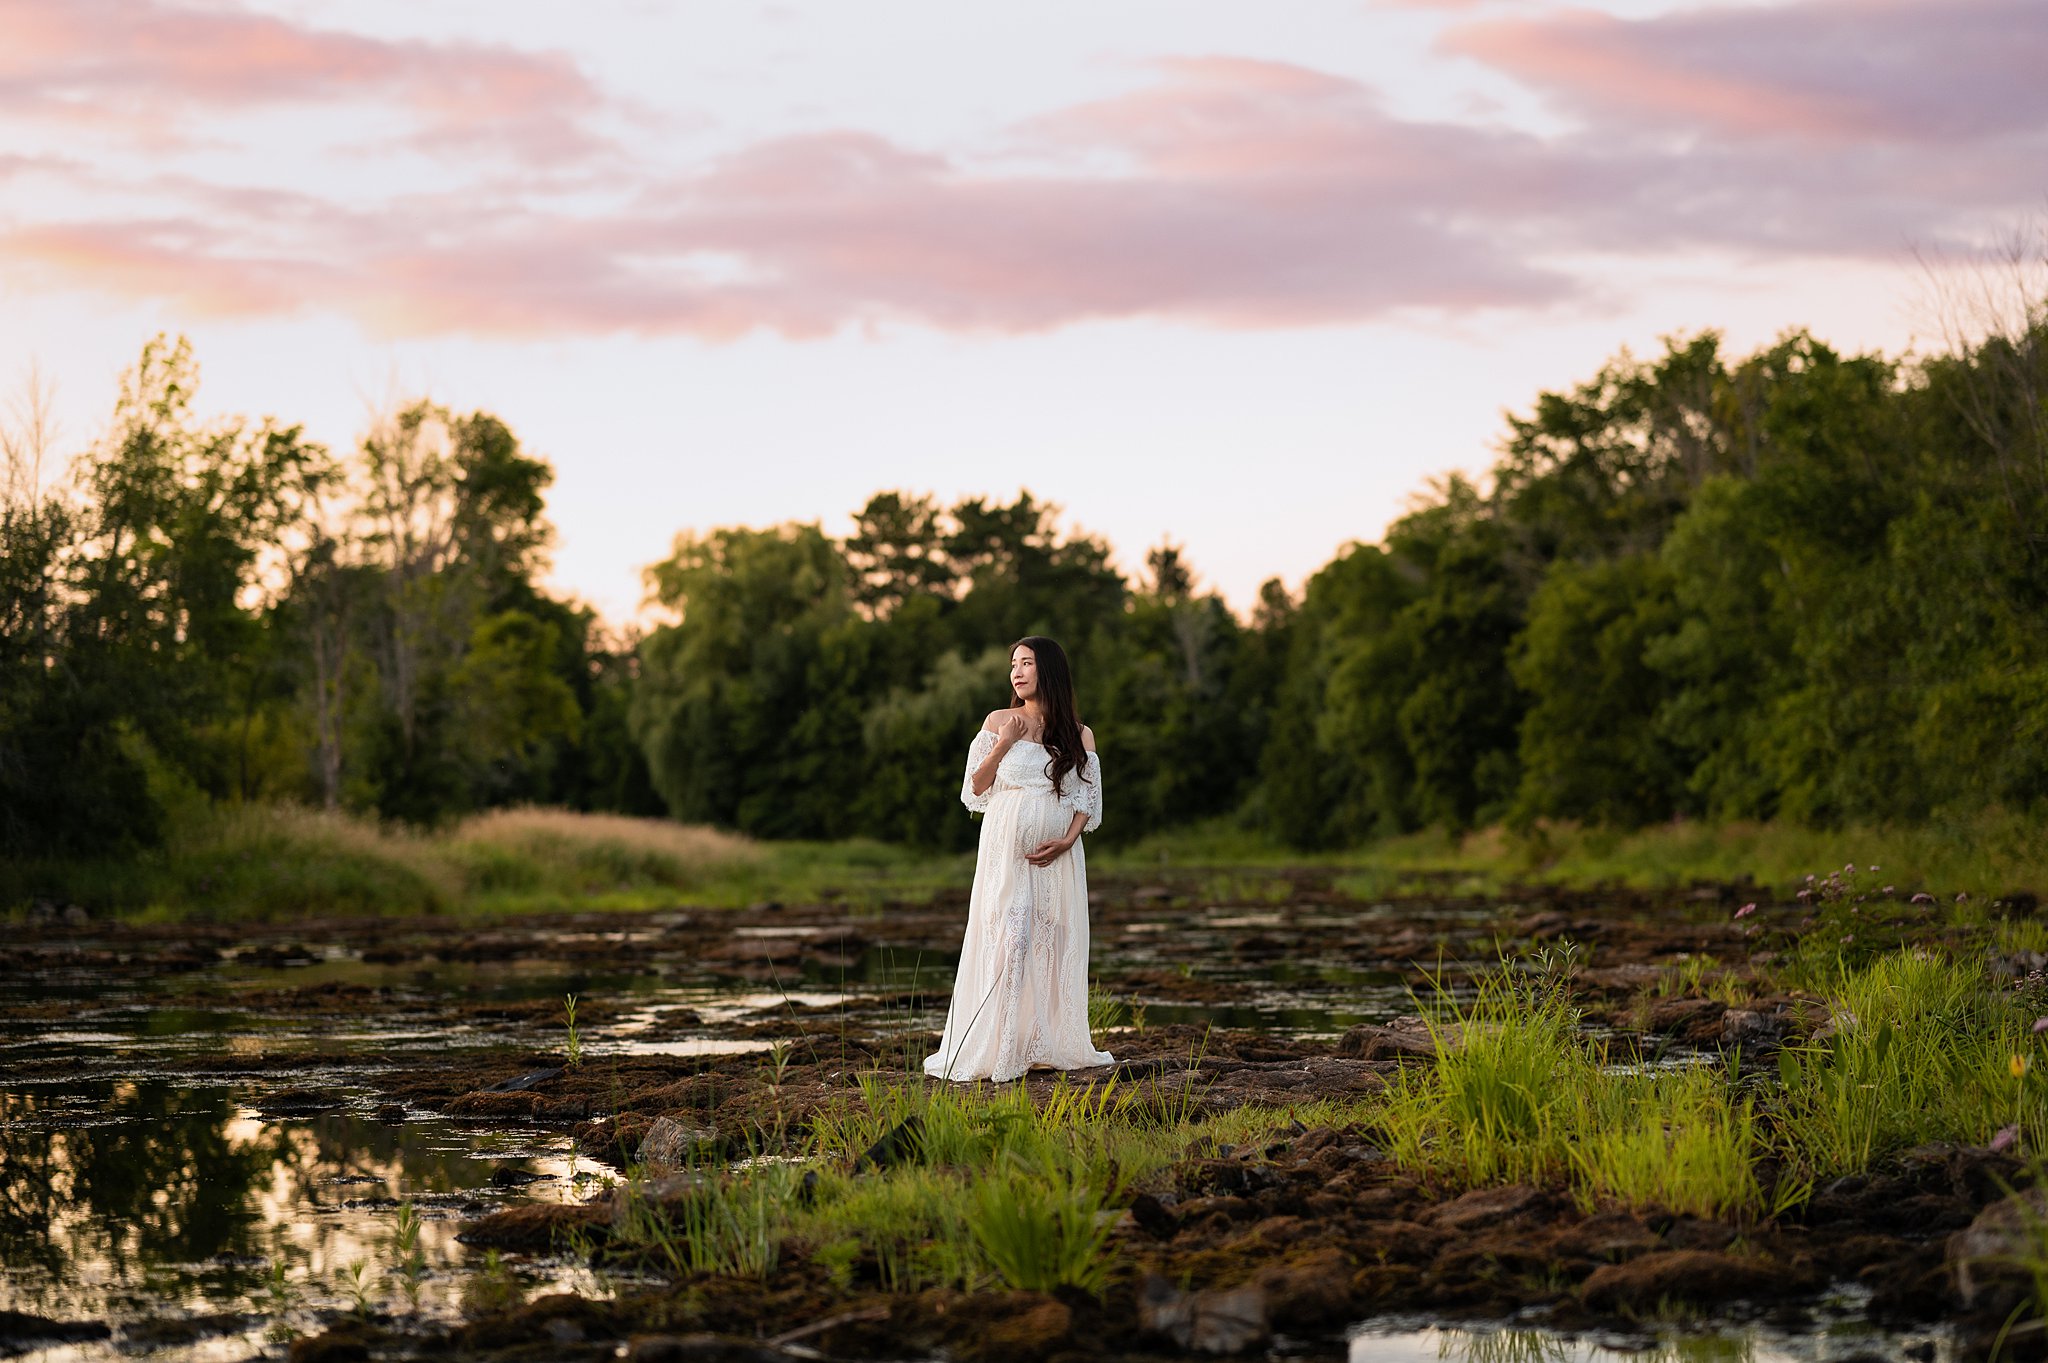 A mother-to-be stands in a white dress and holding her bump in a wetland with tall grass surrounded by trees hautemama